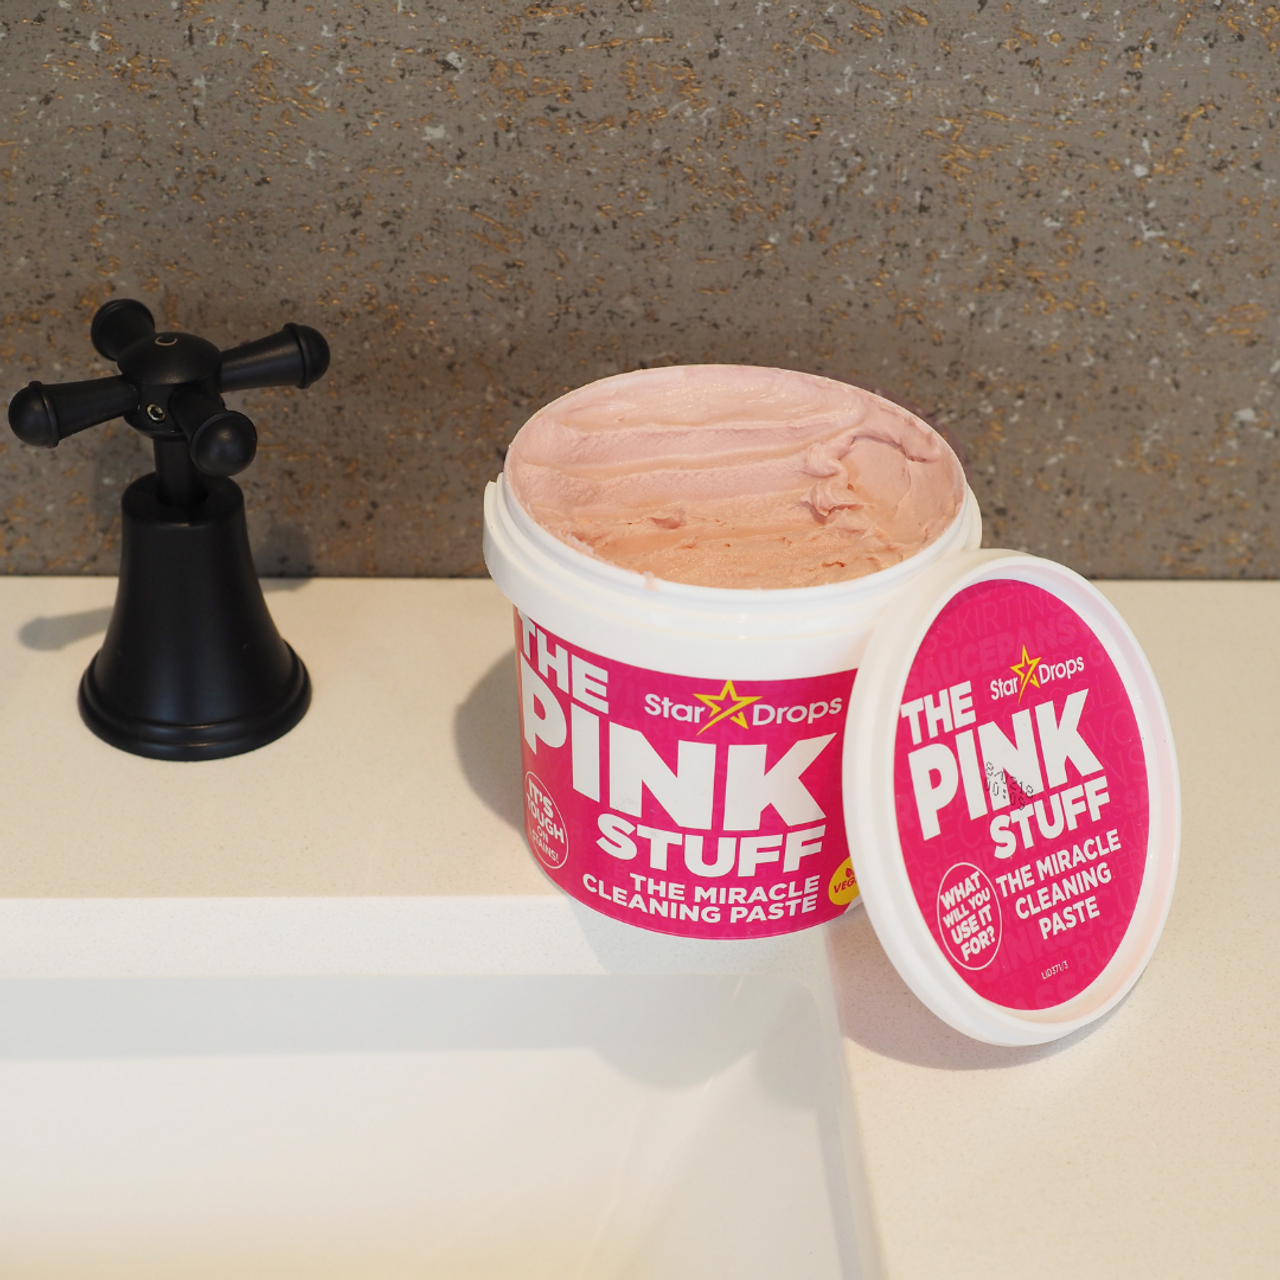 The Pink Stuff Miracle Cleaning Paste (850g)